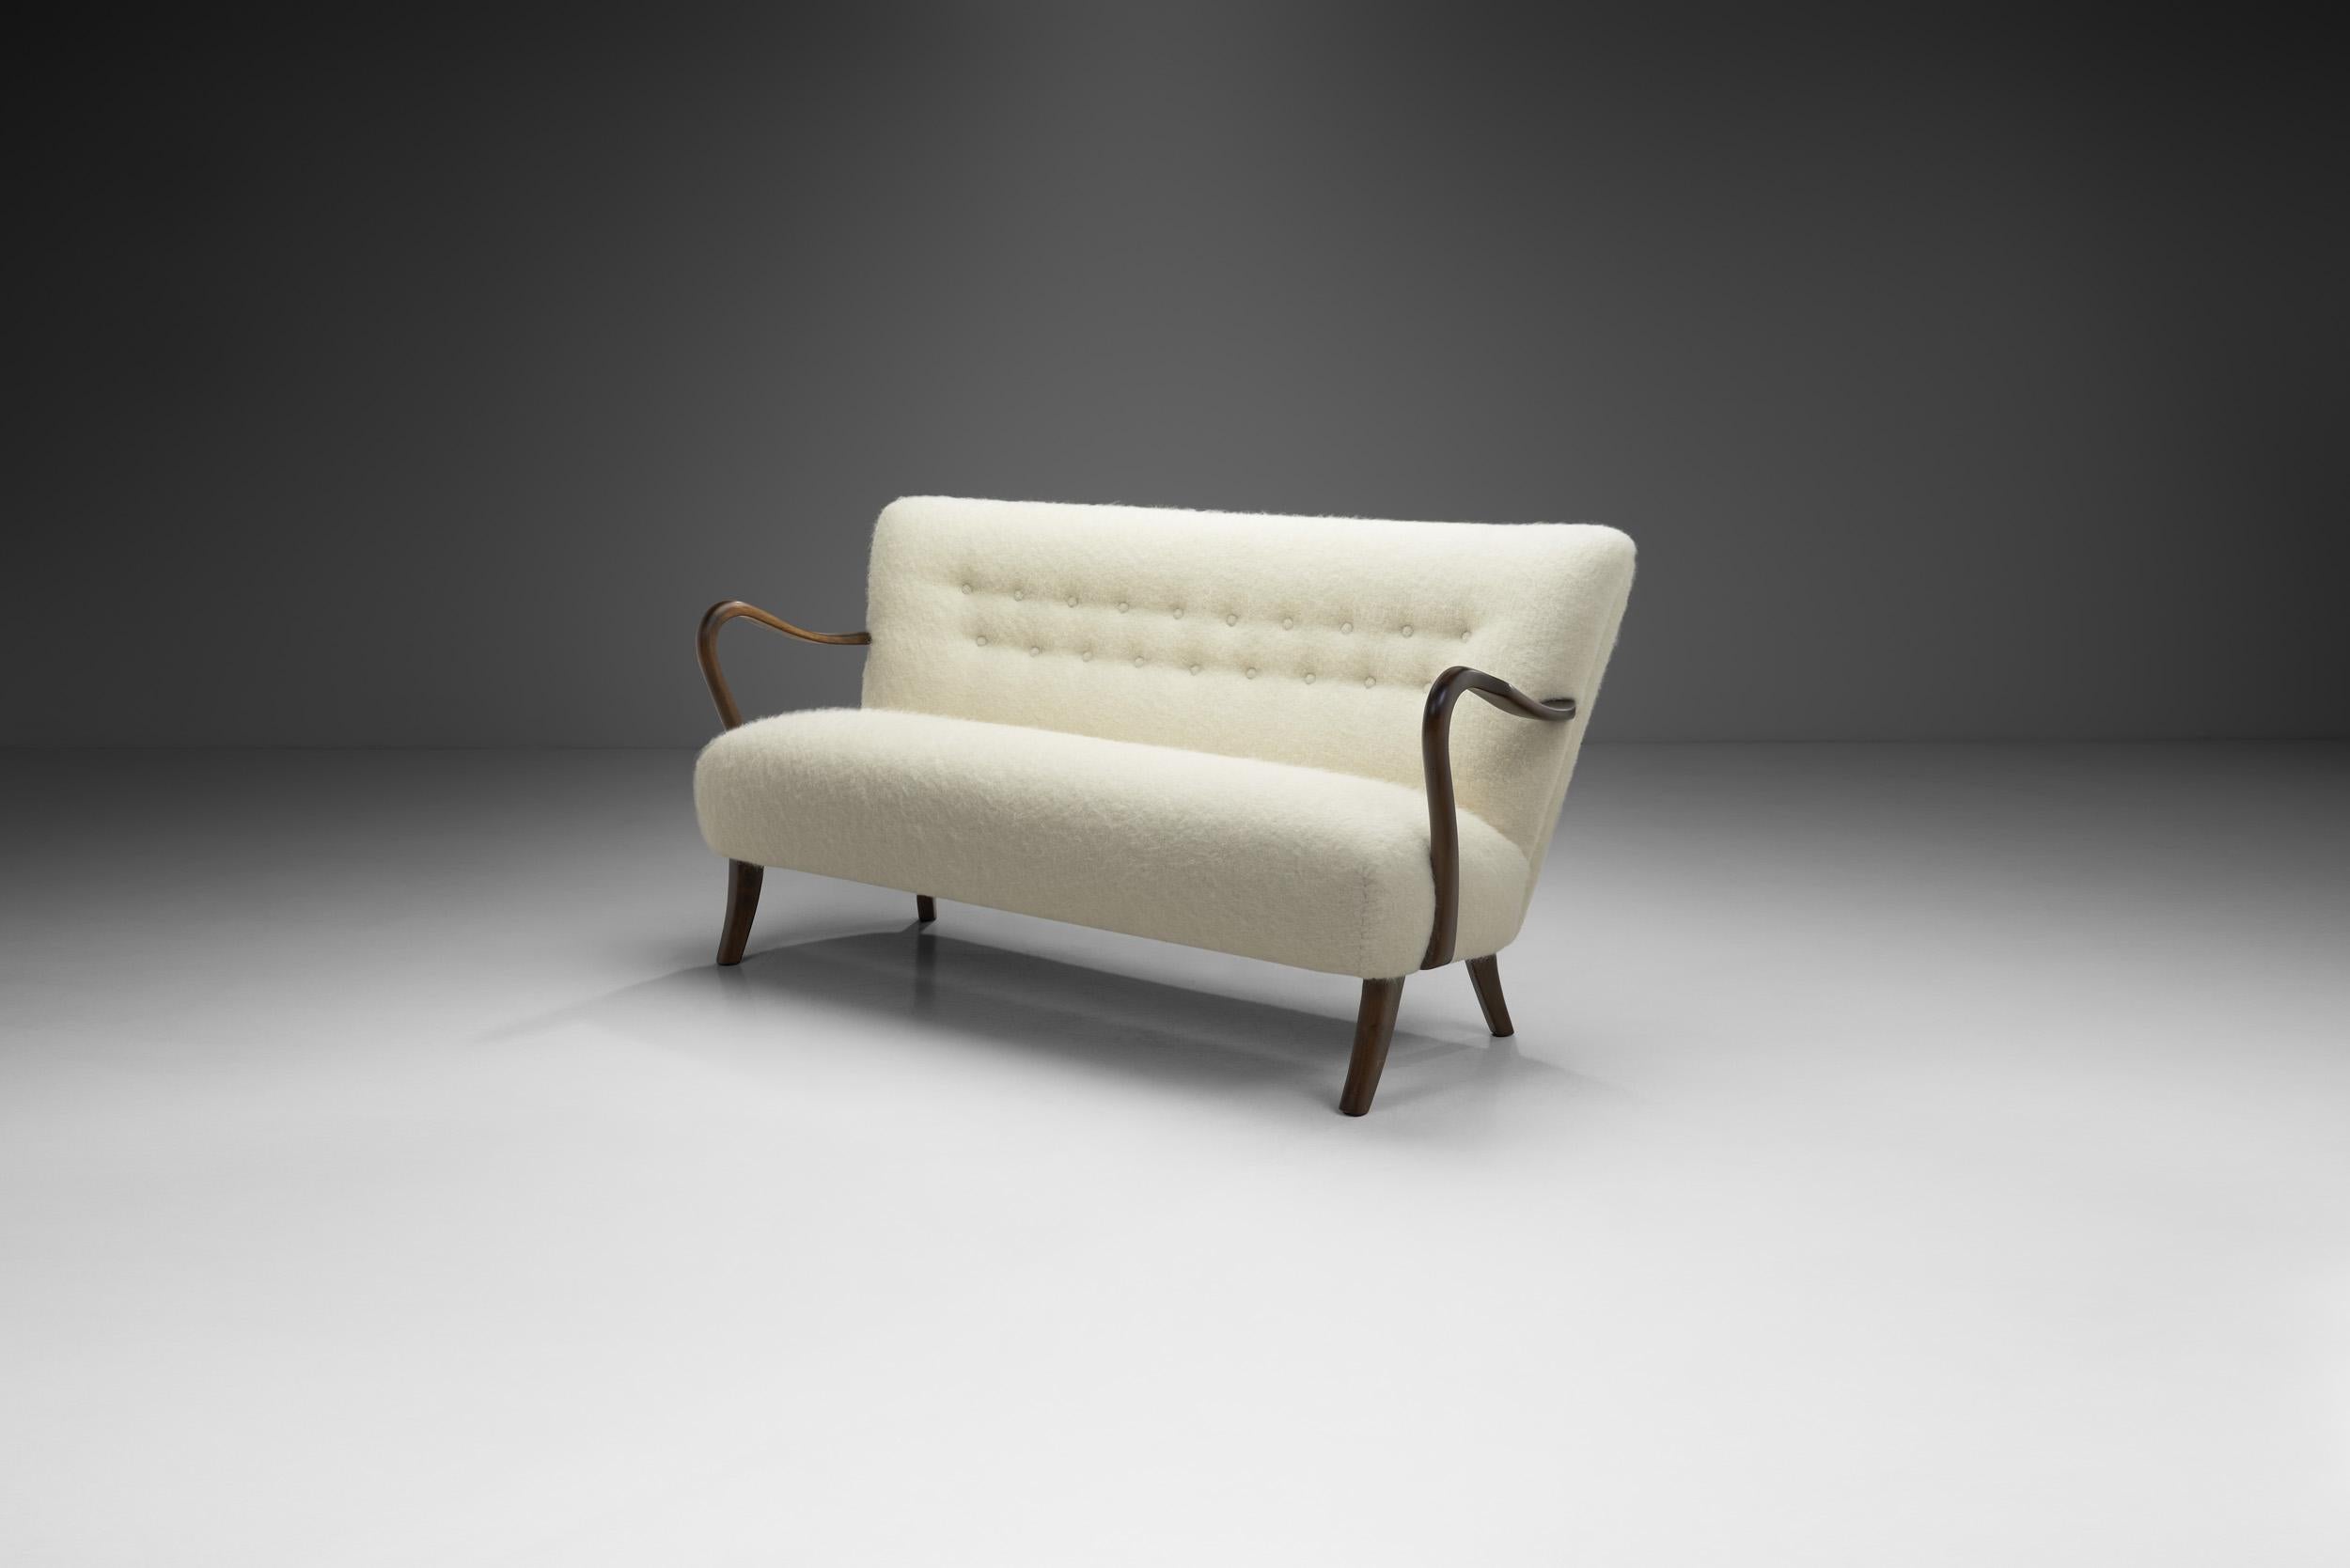 Danish Modern focused more on the aesthetics of modern design whilst employing the exquisite technique and material familiarity of highly skilled craftsmen known as cabinetmakers. Alfred Christensen’s present sofa in this style is a rare and